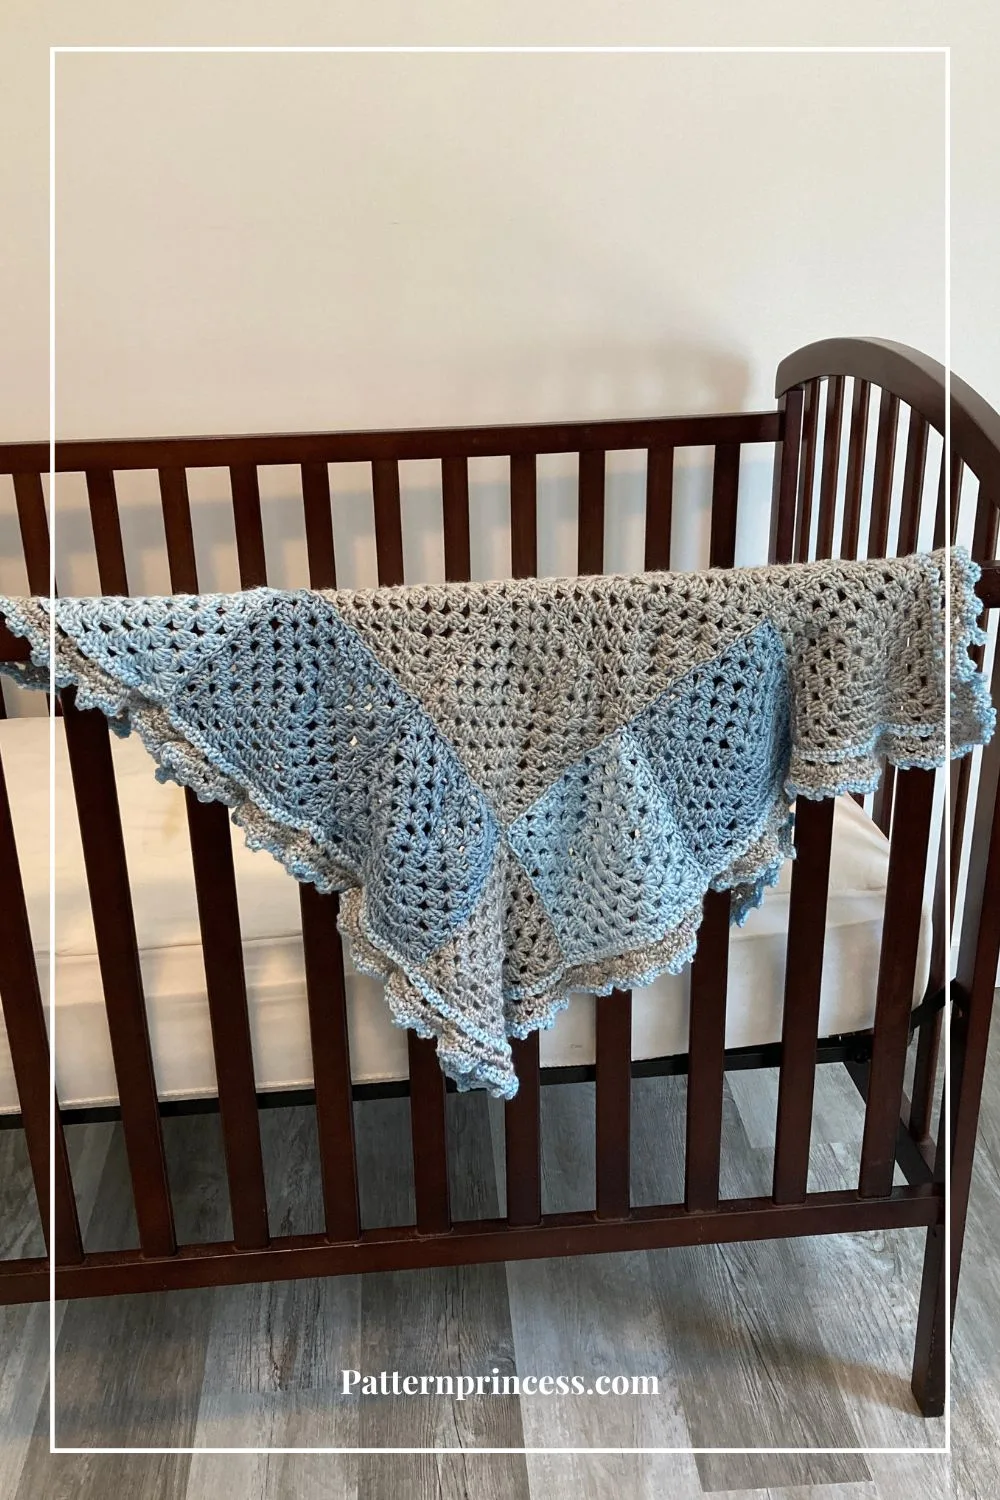 Blue and Grey Baby blanket on crib